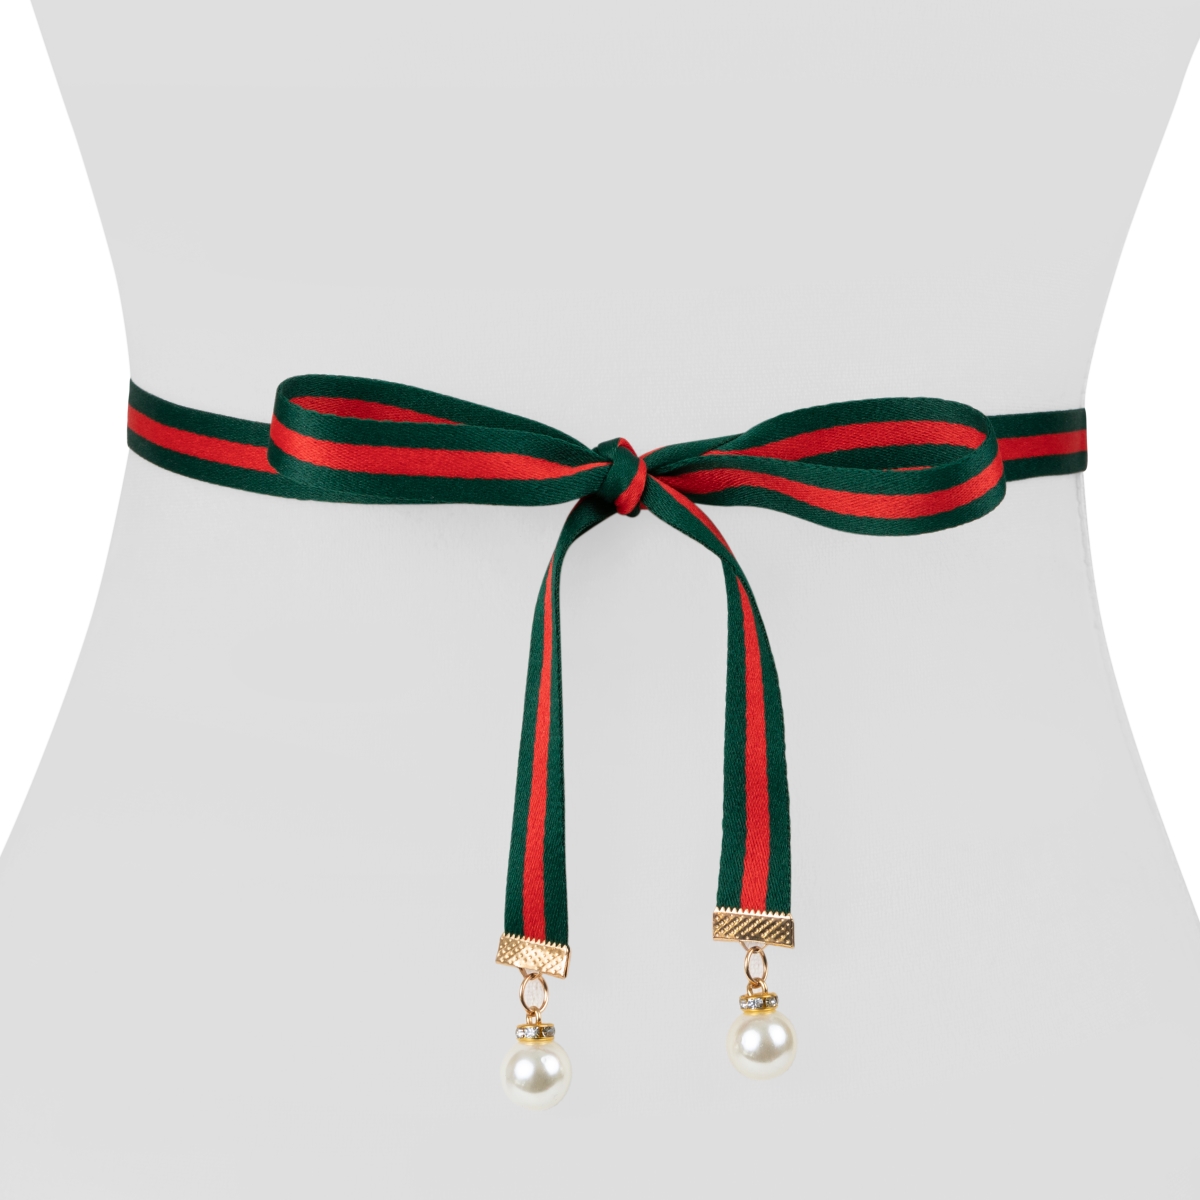 Wj41gr Womens Designer Pearl Ribbon Belt, Green & Red - Extra Small & Extra Large